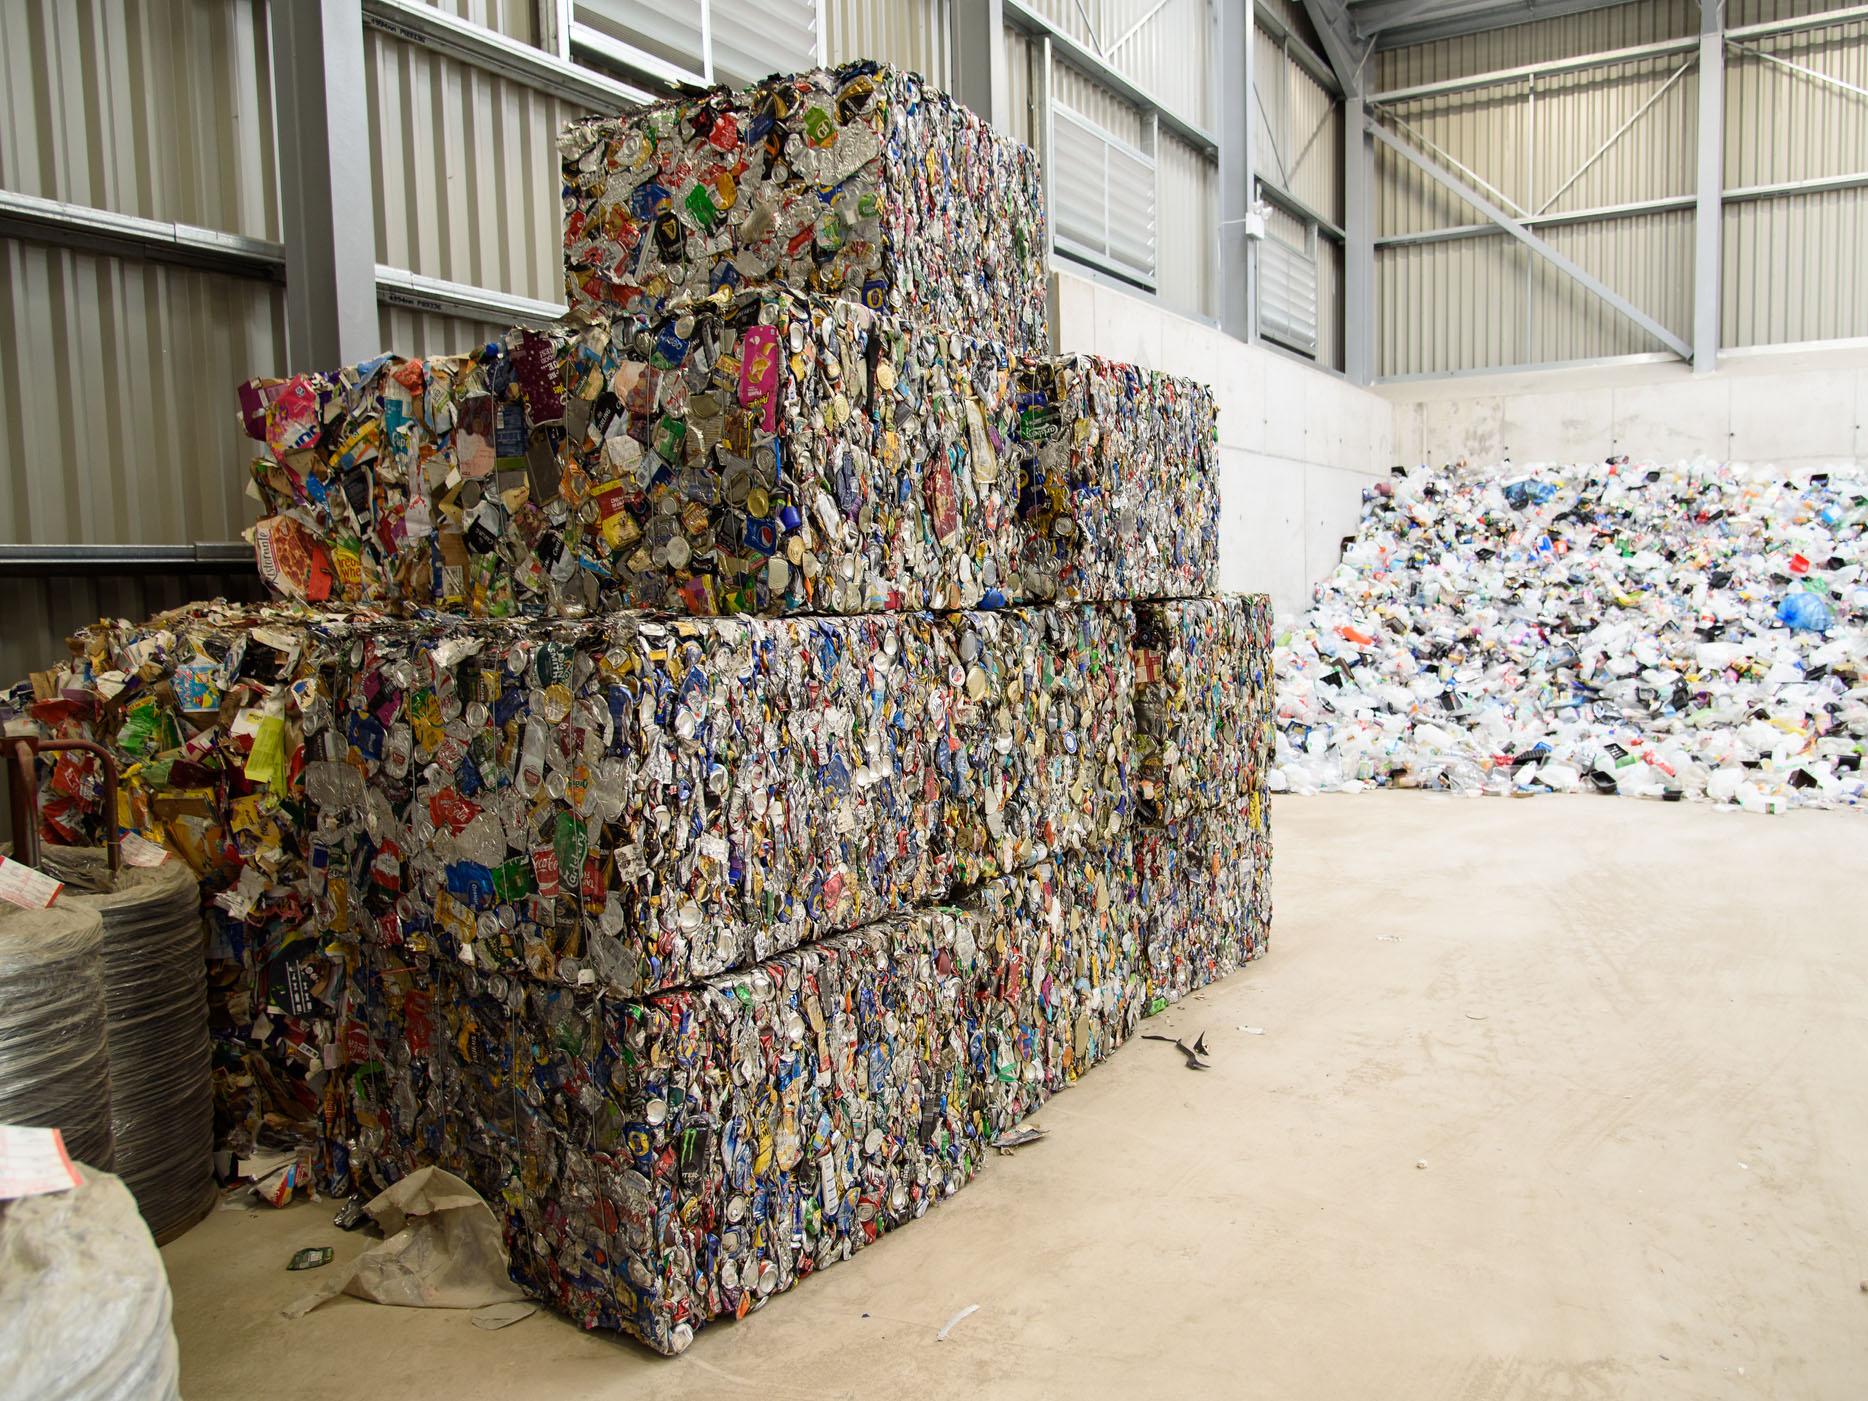 Michael Gove has announced plans for businesses to shoulder the financial burden of recycling